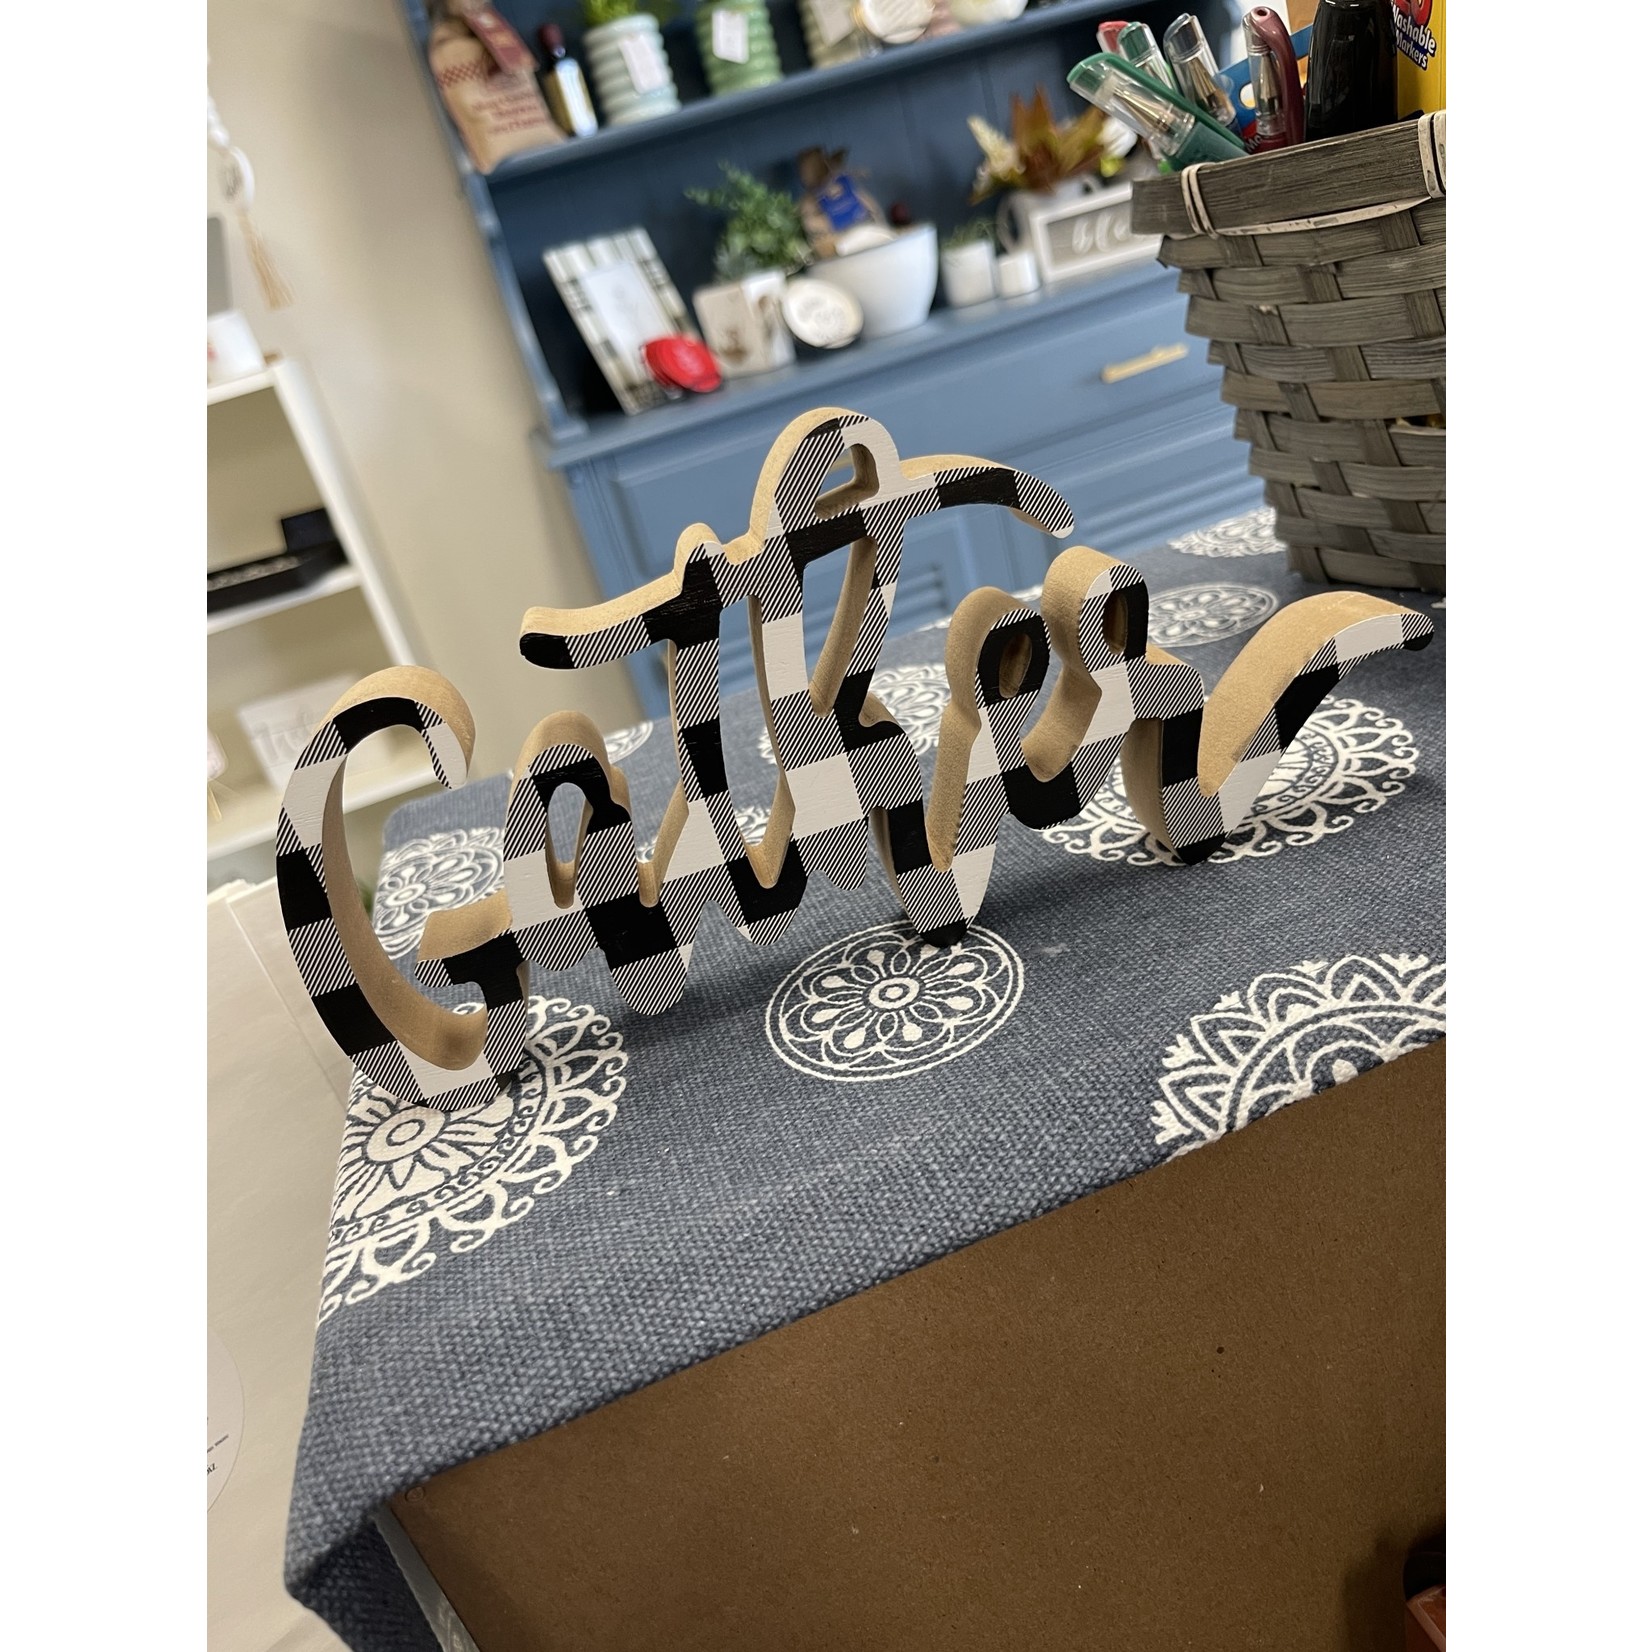 CC Bella Boutique "Gather" Wooden Tabletop Word-Black & White